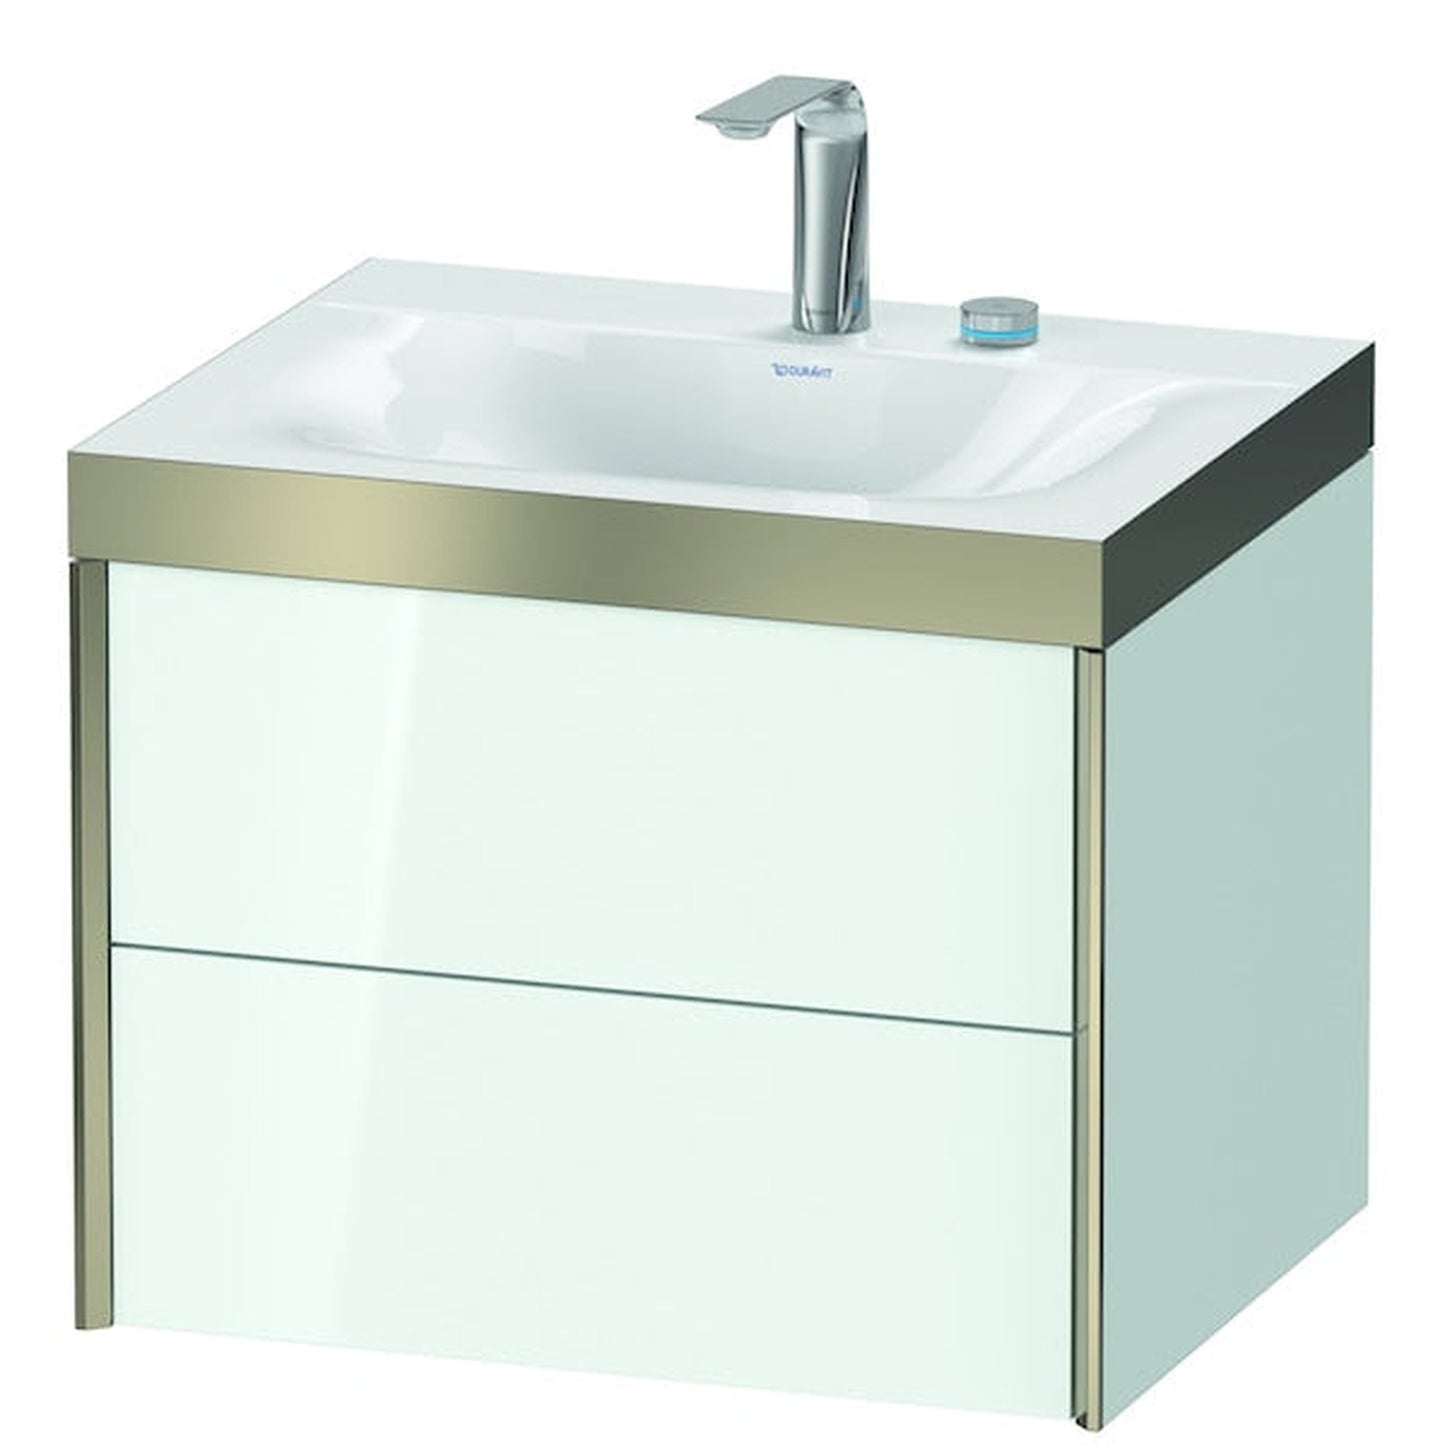 Duravit Xviu 24" x 20" x 19" Two Drawer C-Bonded Wall-Mount Vanity Kit With Two Tap Holes, White (XV4614EB185P)